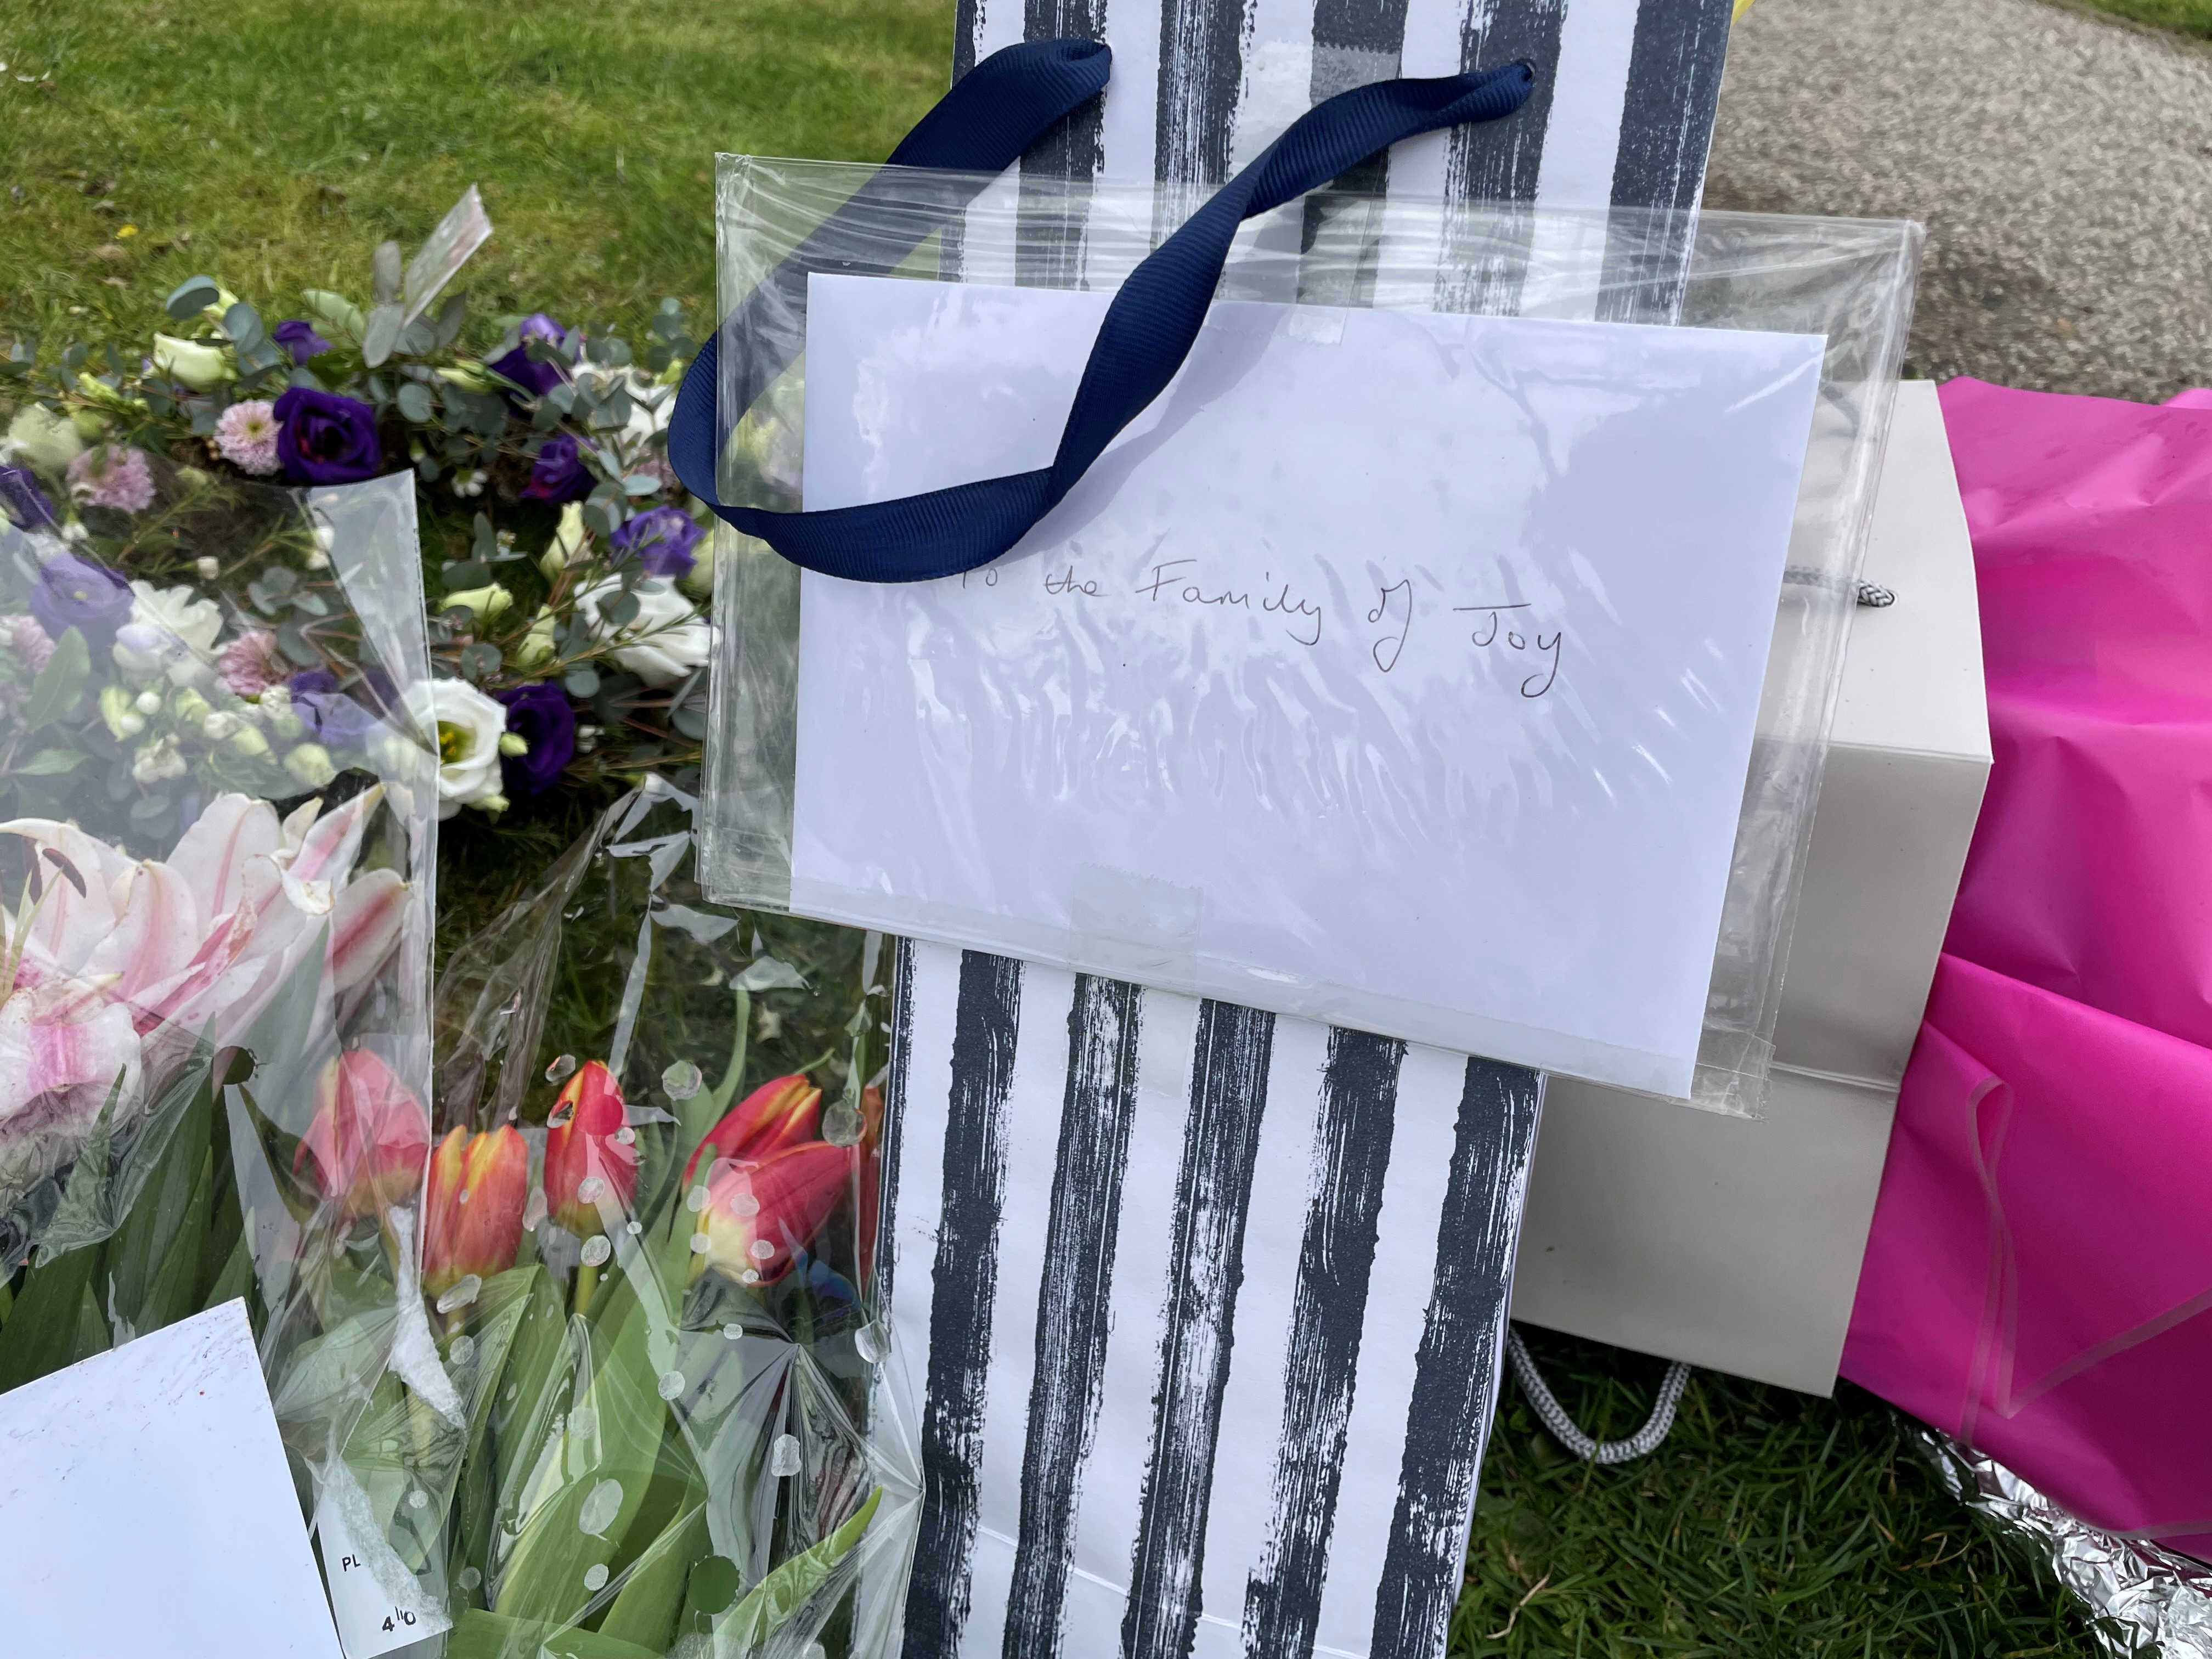 Floral tributes in Grayson Avenue, Pakefield, Suffolk remains sealed off as police investigate the murder of pensioner Joy Middleditch. (Sam Russell/ PA)